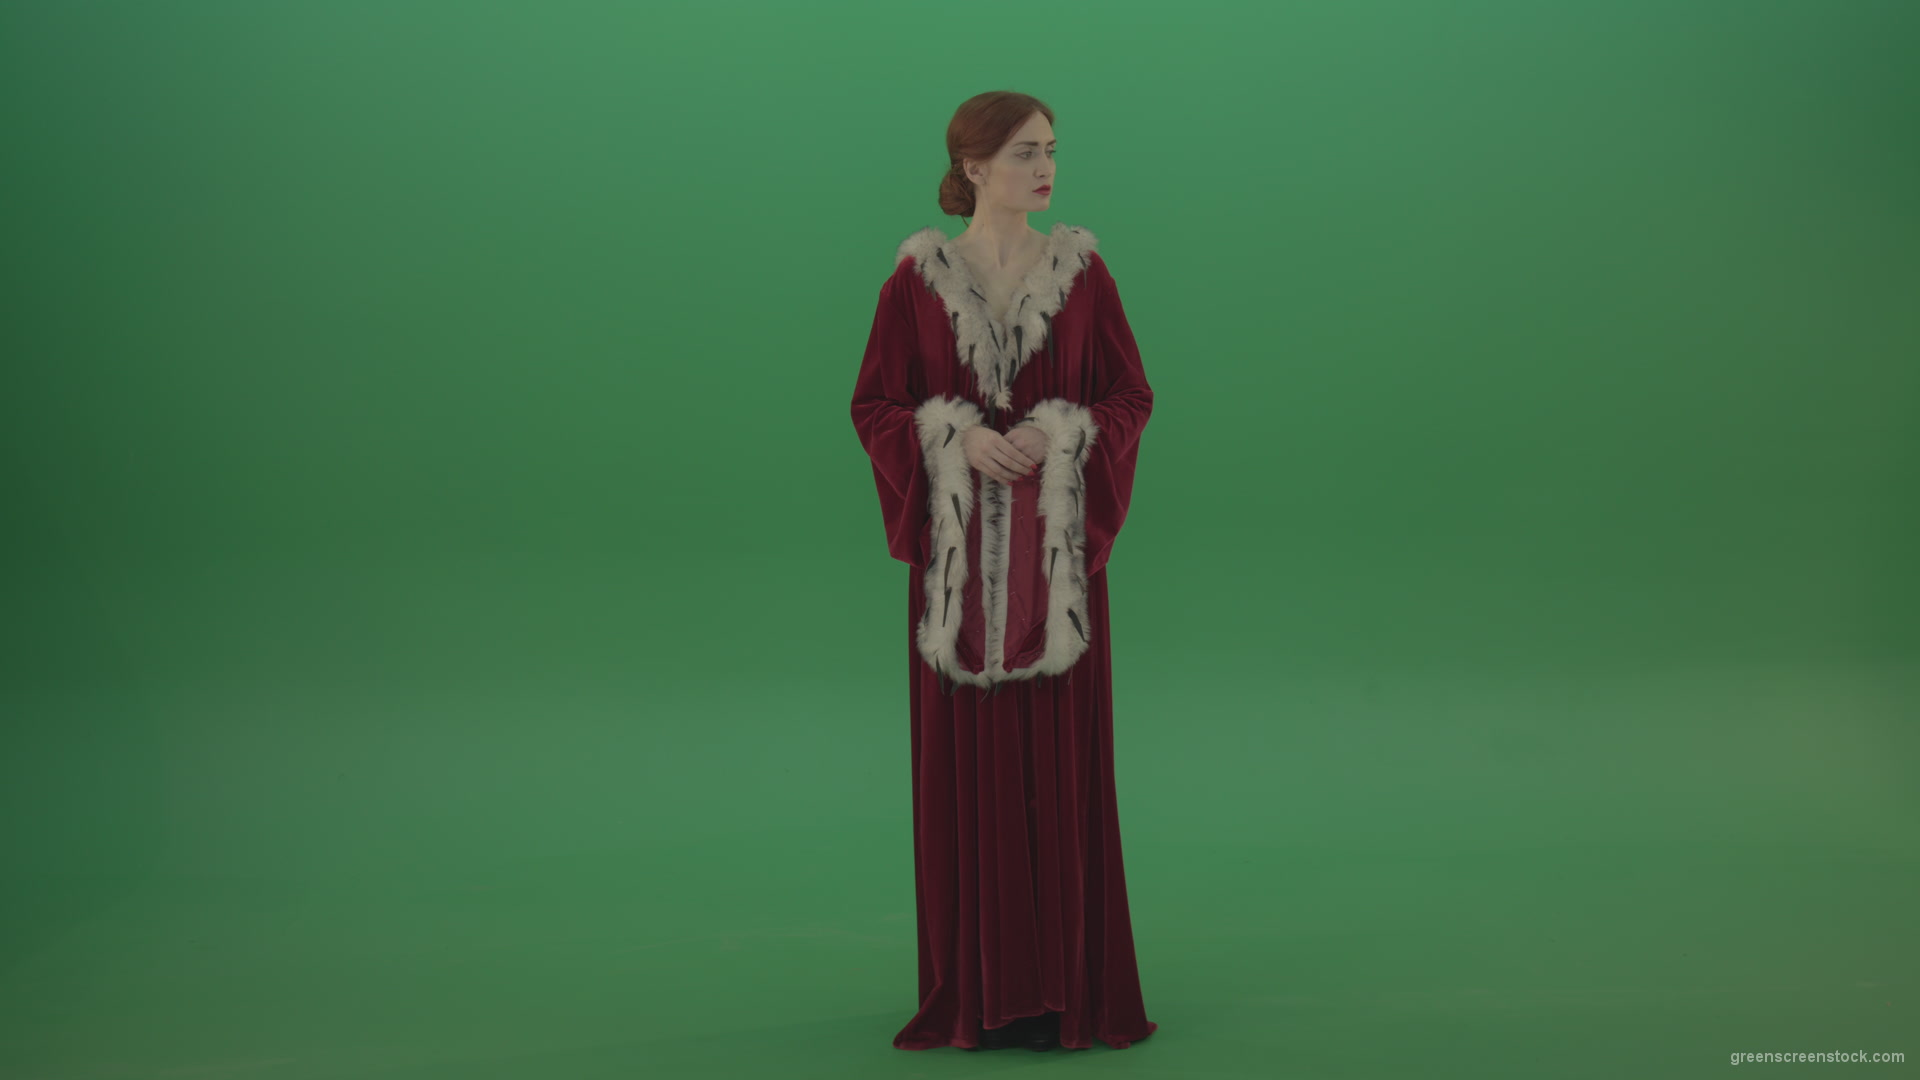 Princess-thinks-and-elegantly-gracefully-turns-her-head-in-different-directions_007 Green Screen Stock